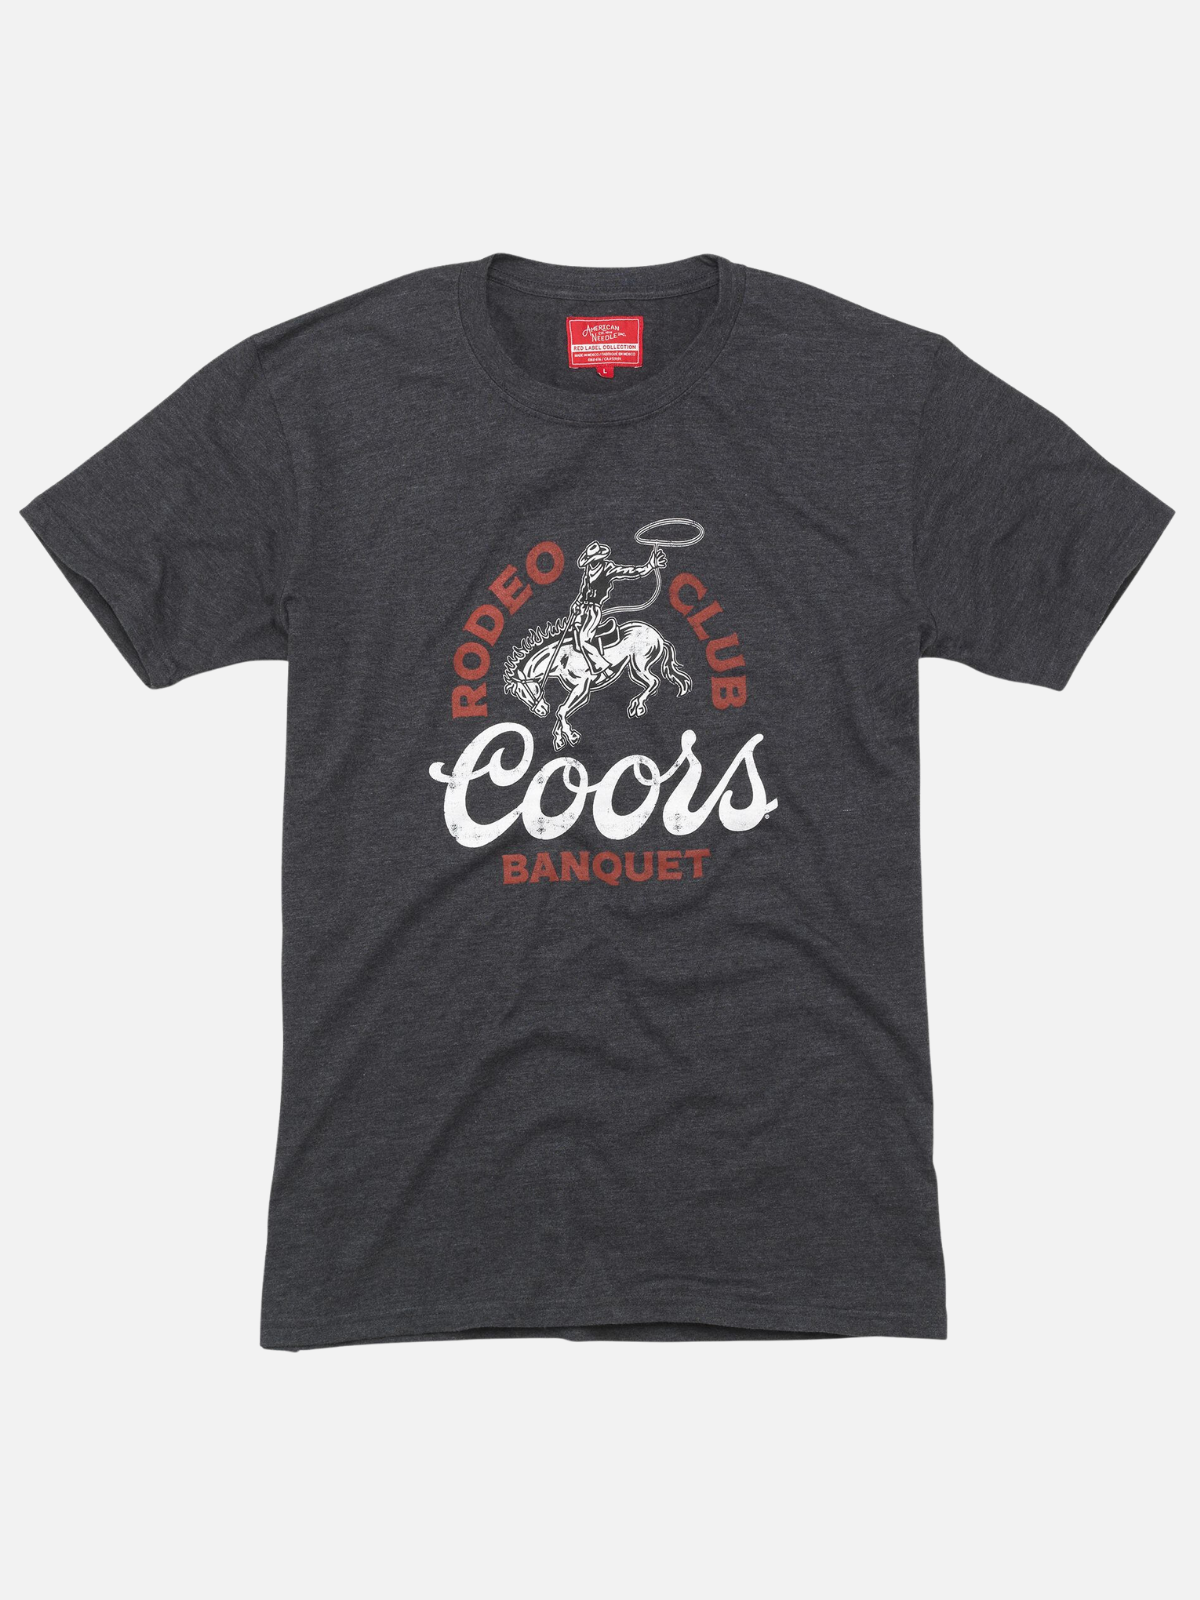 american needle coors banquet rodeo club red label tee ss short sleeve t-shirt heather grey gray charcoal kempt athens ga georgia men's clothing store